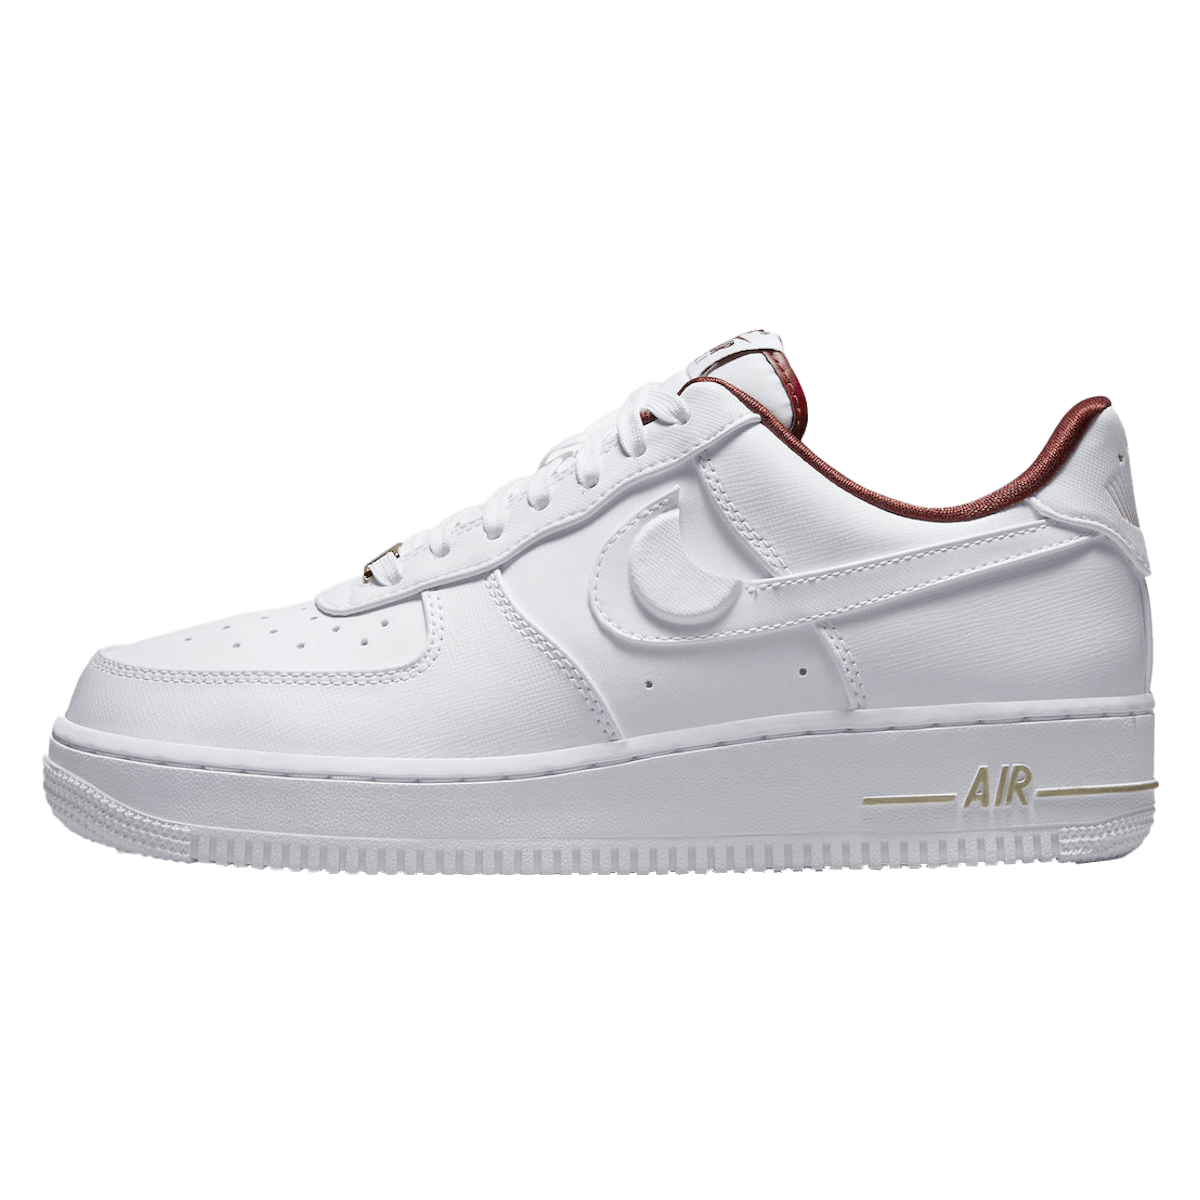 Nike Air Force 1 Low SE "Just Do It Hangtag"